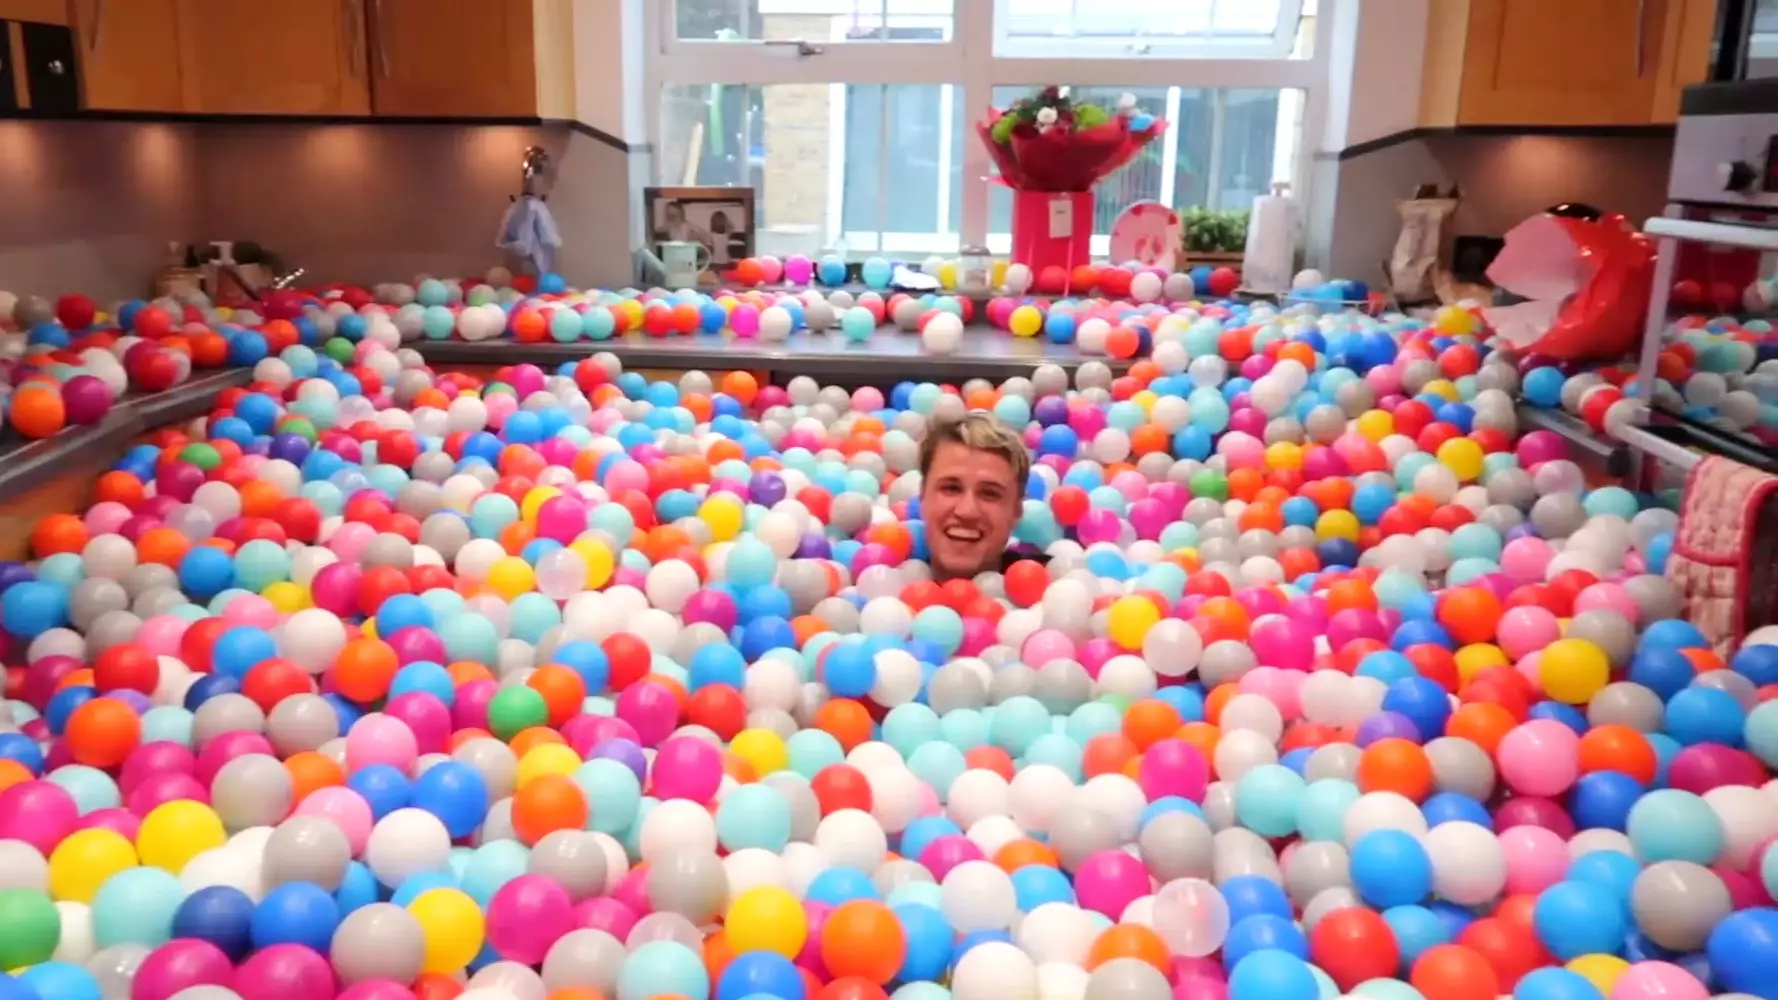 Dad Turns House Into Giant Ball Pit